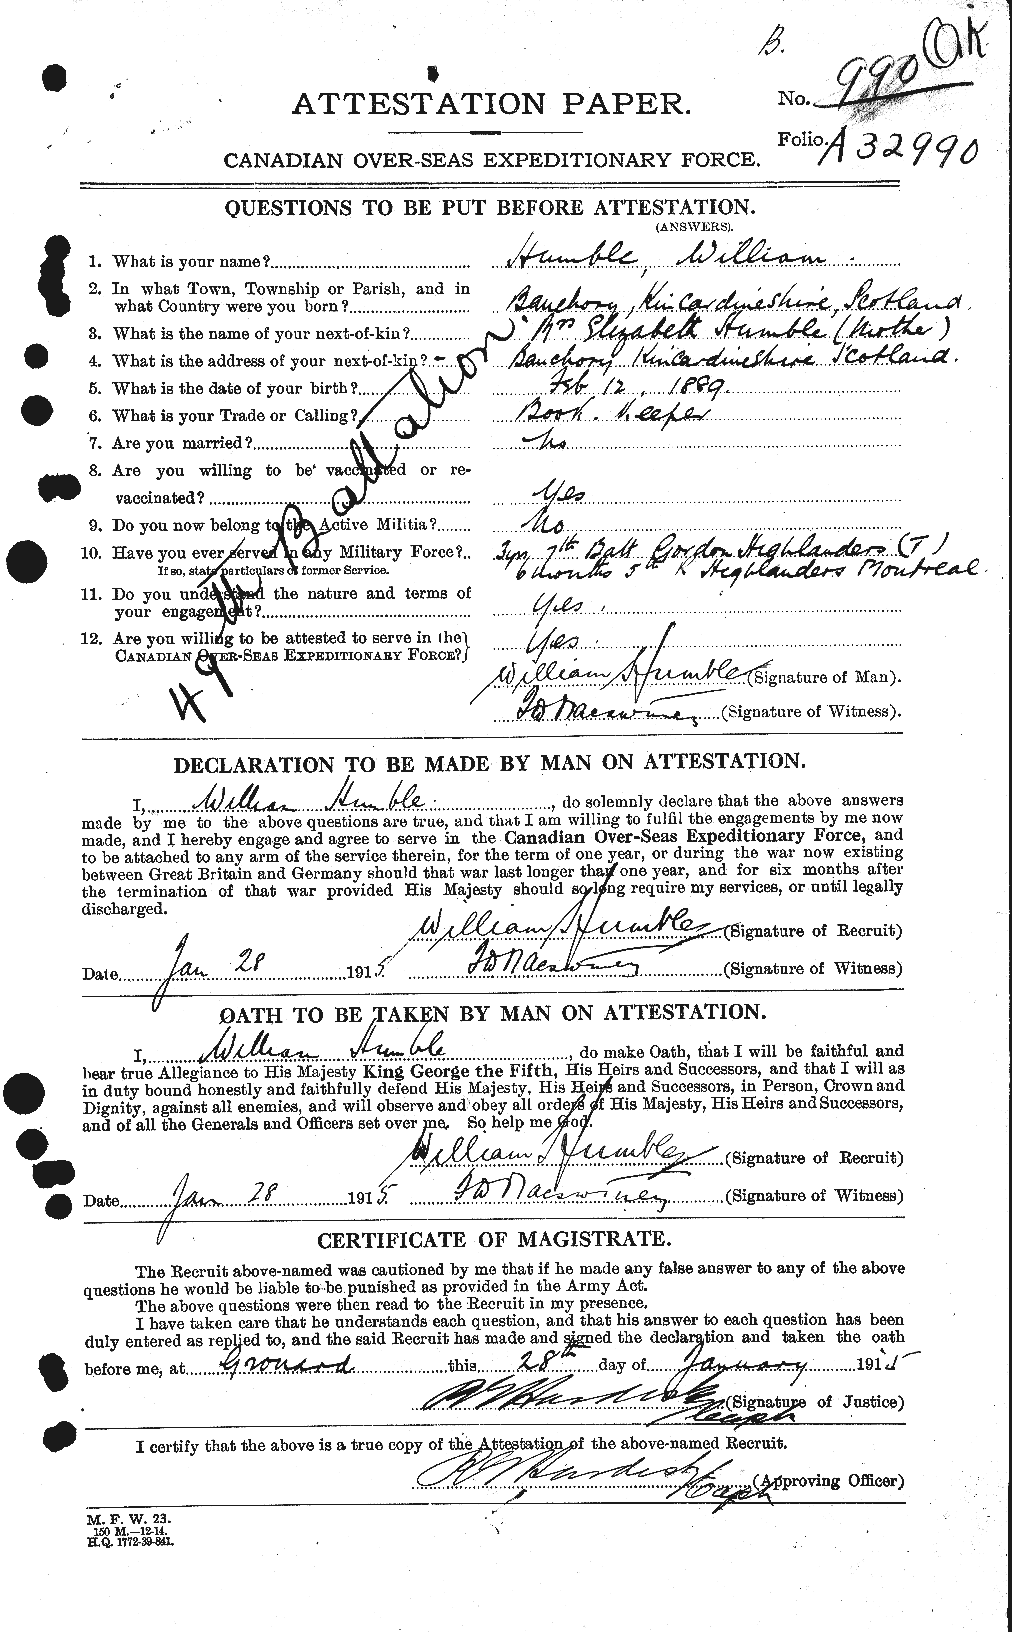 Personnel Records of the First World War - CEF 407202a